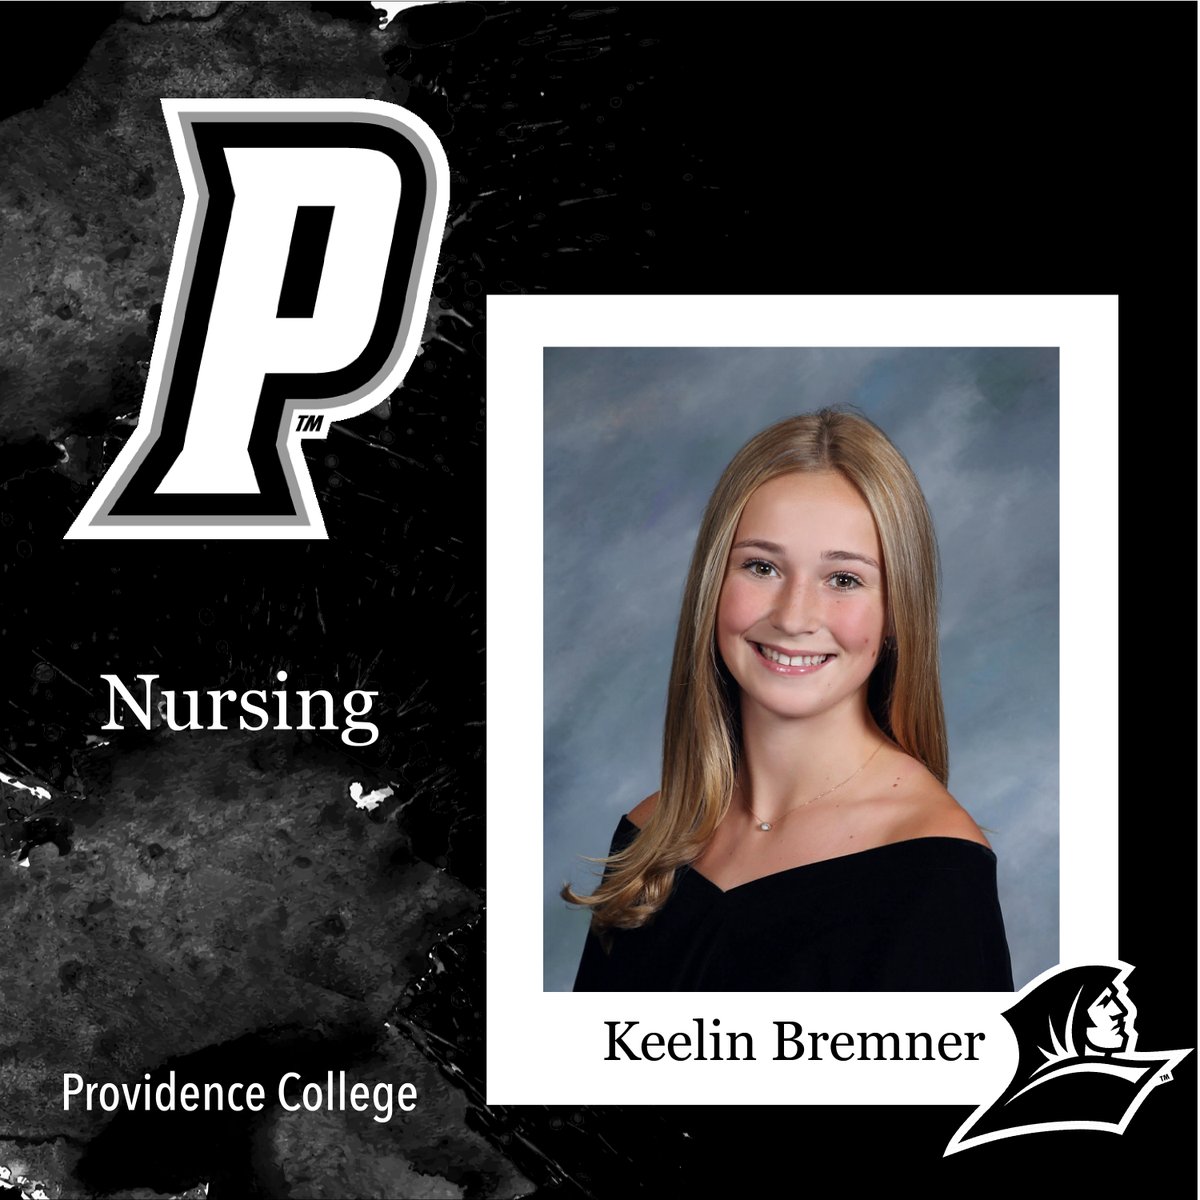 Congratulations!
#ProvidenceCollege #Nursing
#GoMustangs #CollegeCommitments #GoingToDoGreatThings